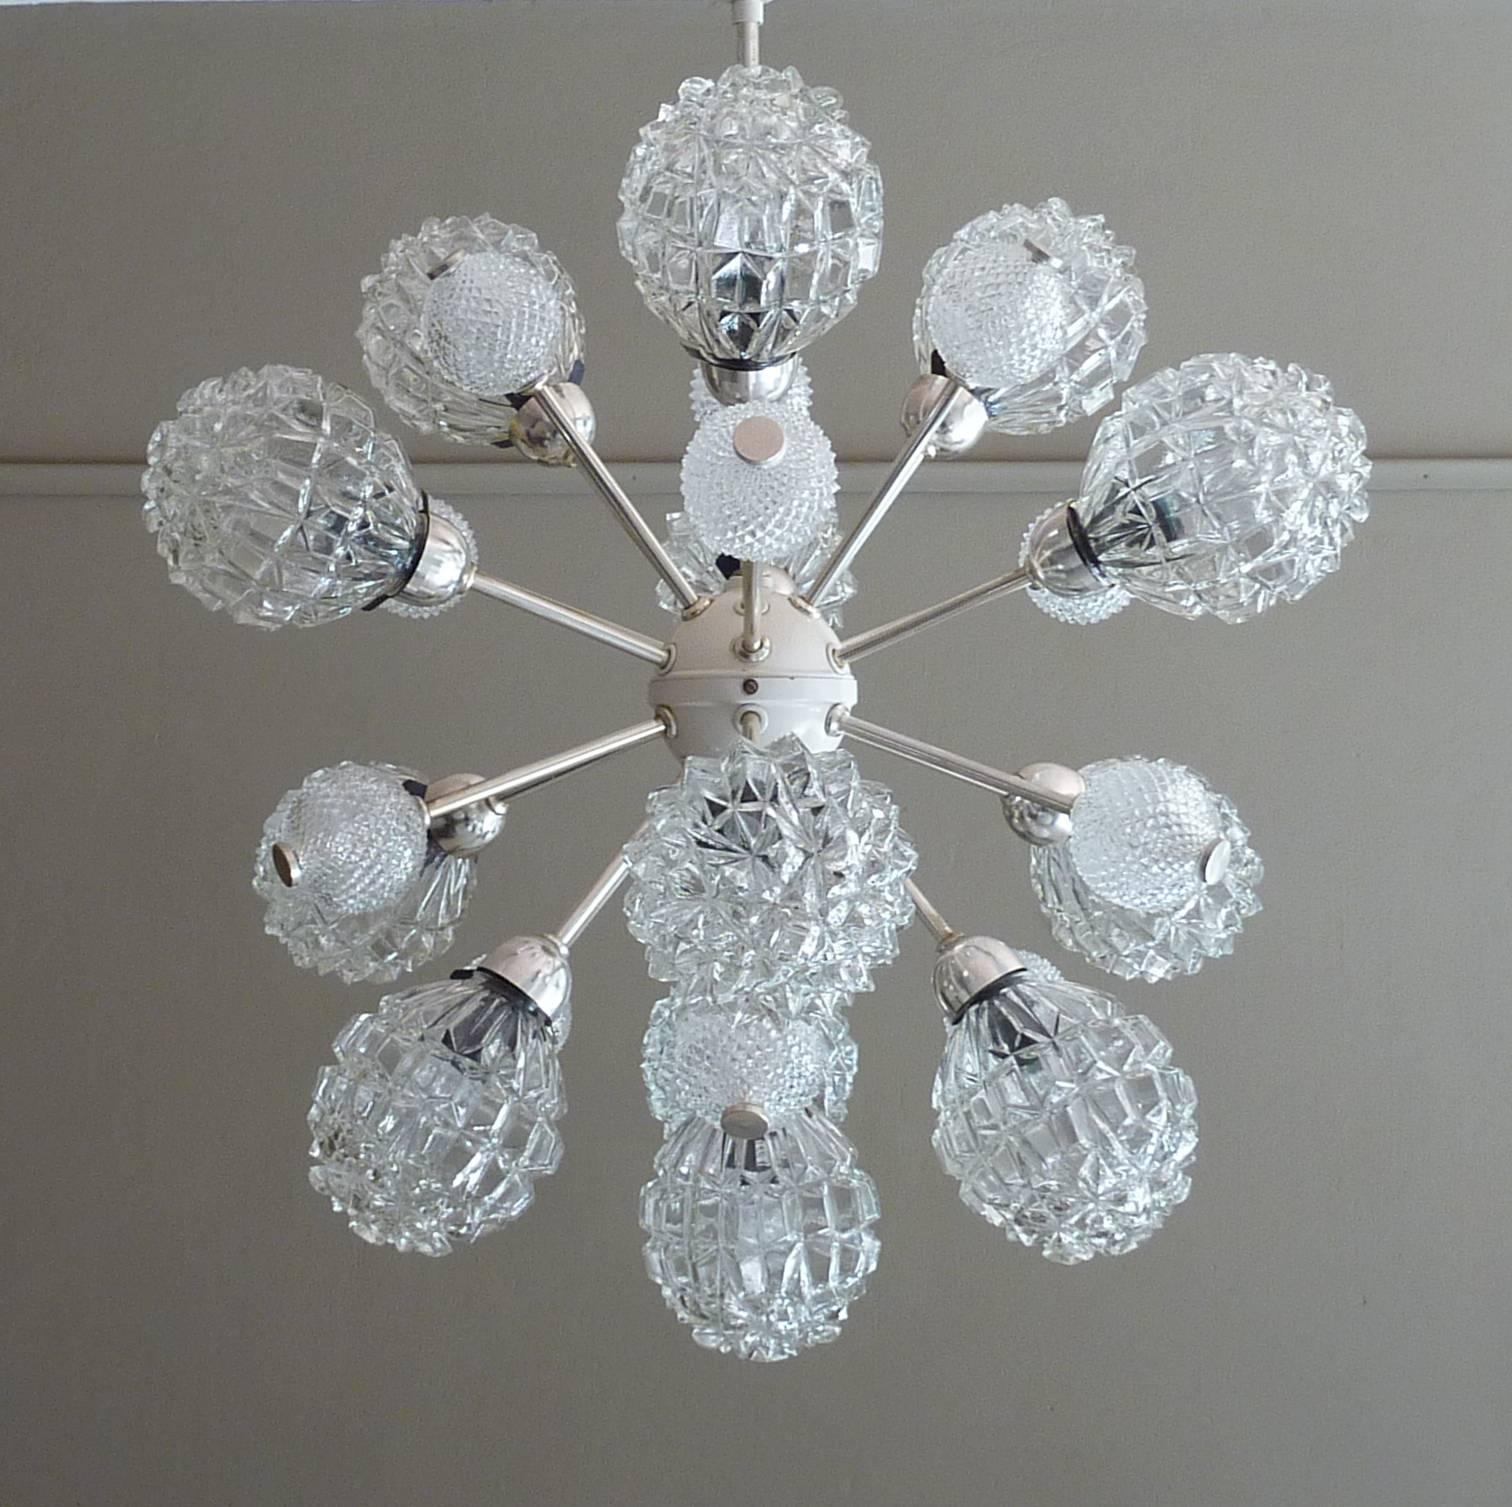 This German vintage chrome and textured glass bubble Sputnik chandelier by Richard Essig was produced in the 1970s. It was Produced in the DDR. It is in Good vintage condition. The Chandelier makes a great light a fits to Modern as well to classical